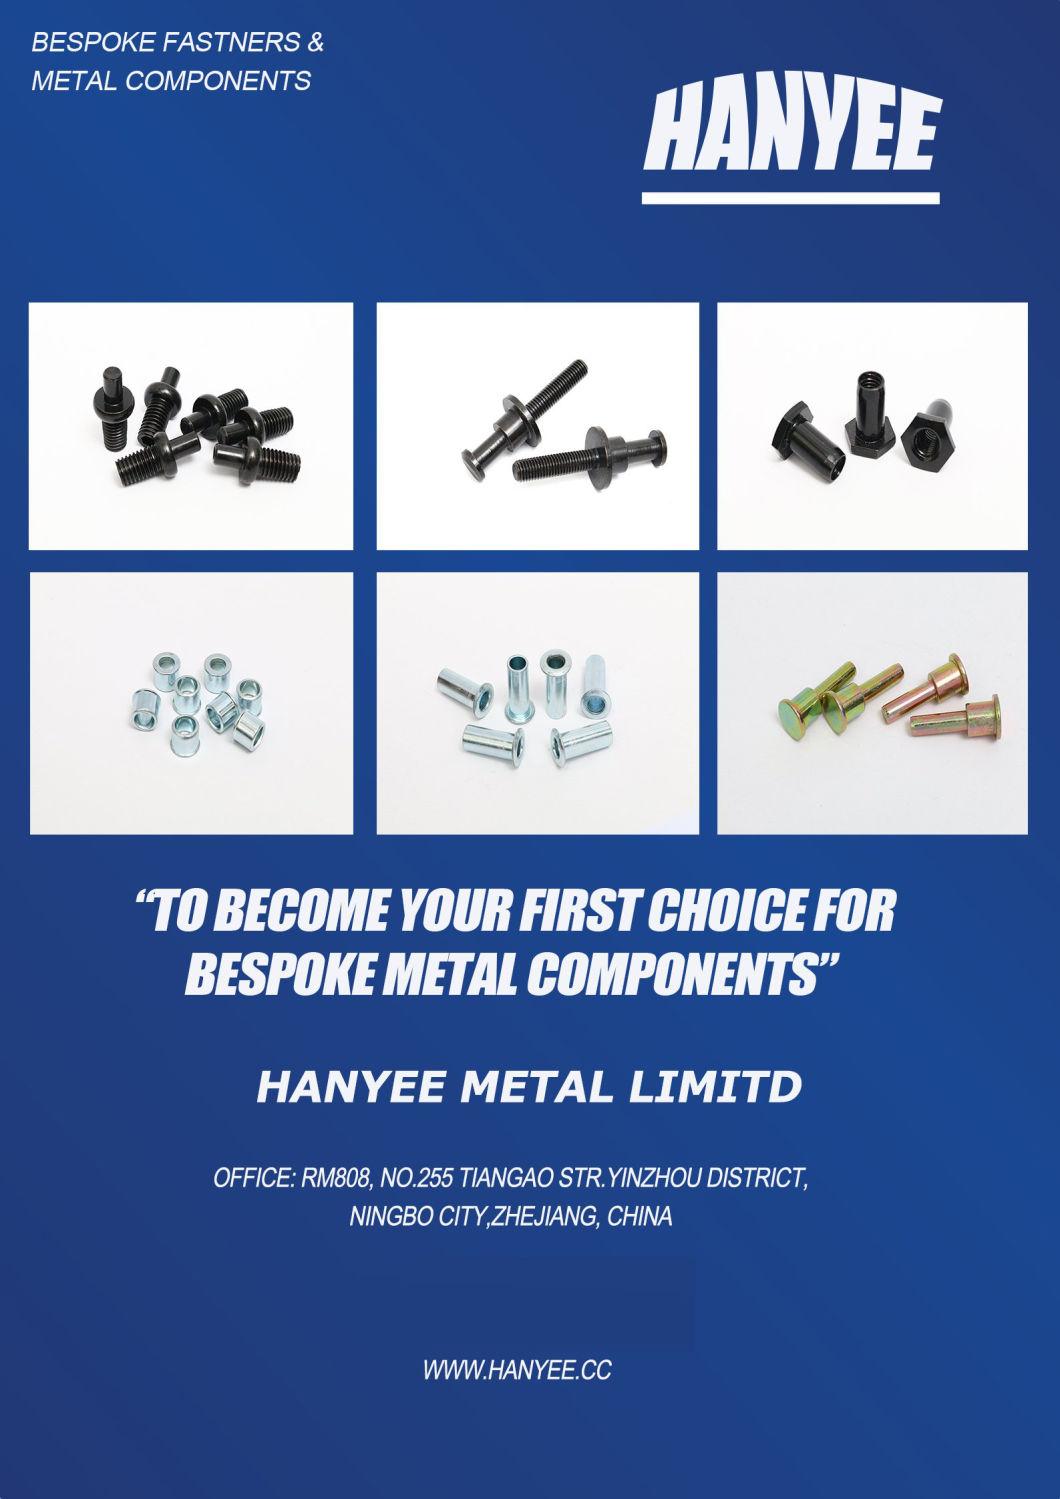 High Quantity Cu Plating Delivery 15-30days Customized Rivet for Machinery by Hanyee Metal